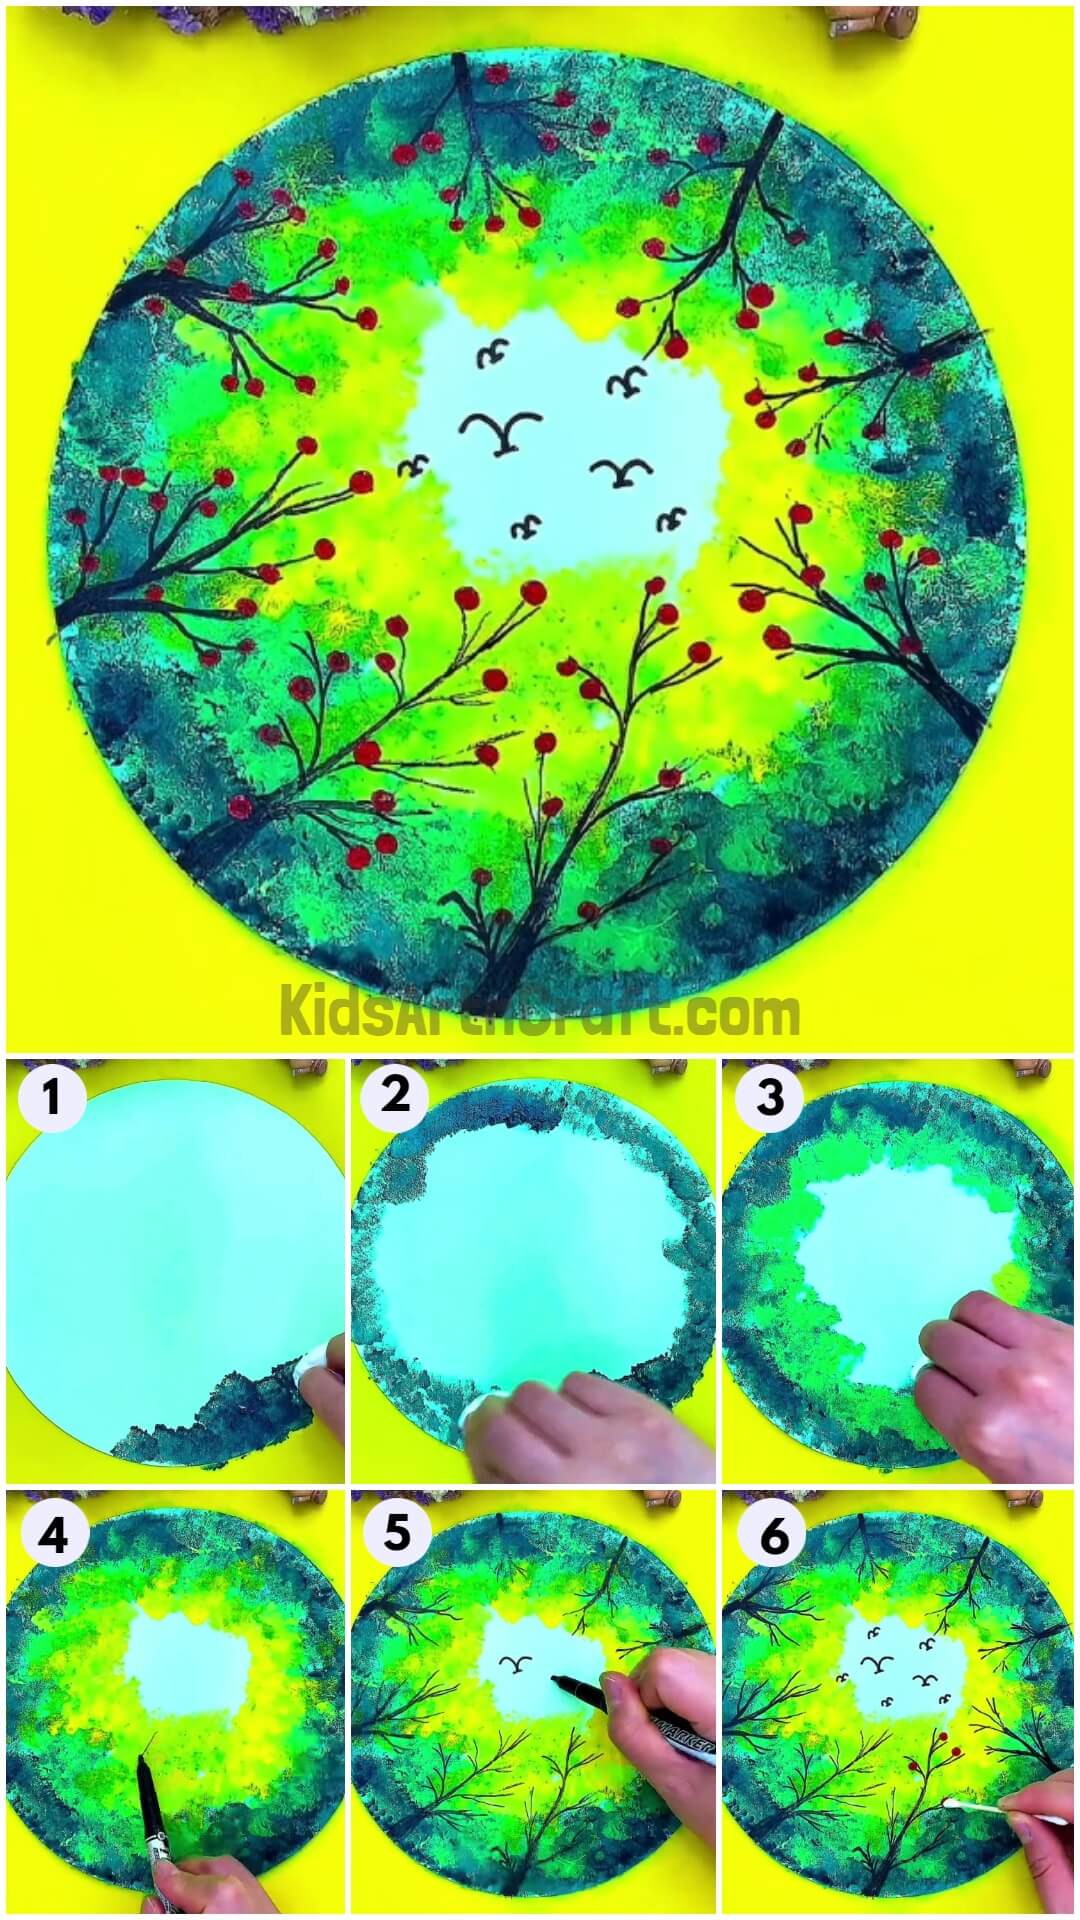 Creative Forest Painting Art Tutorial For Kids